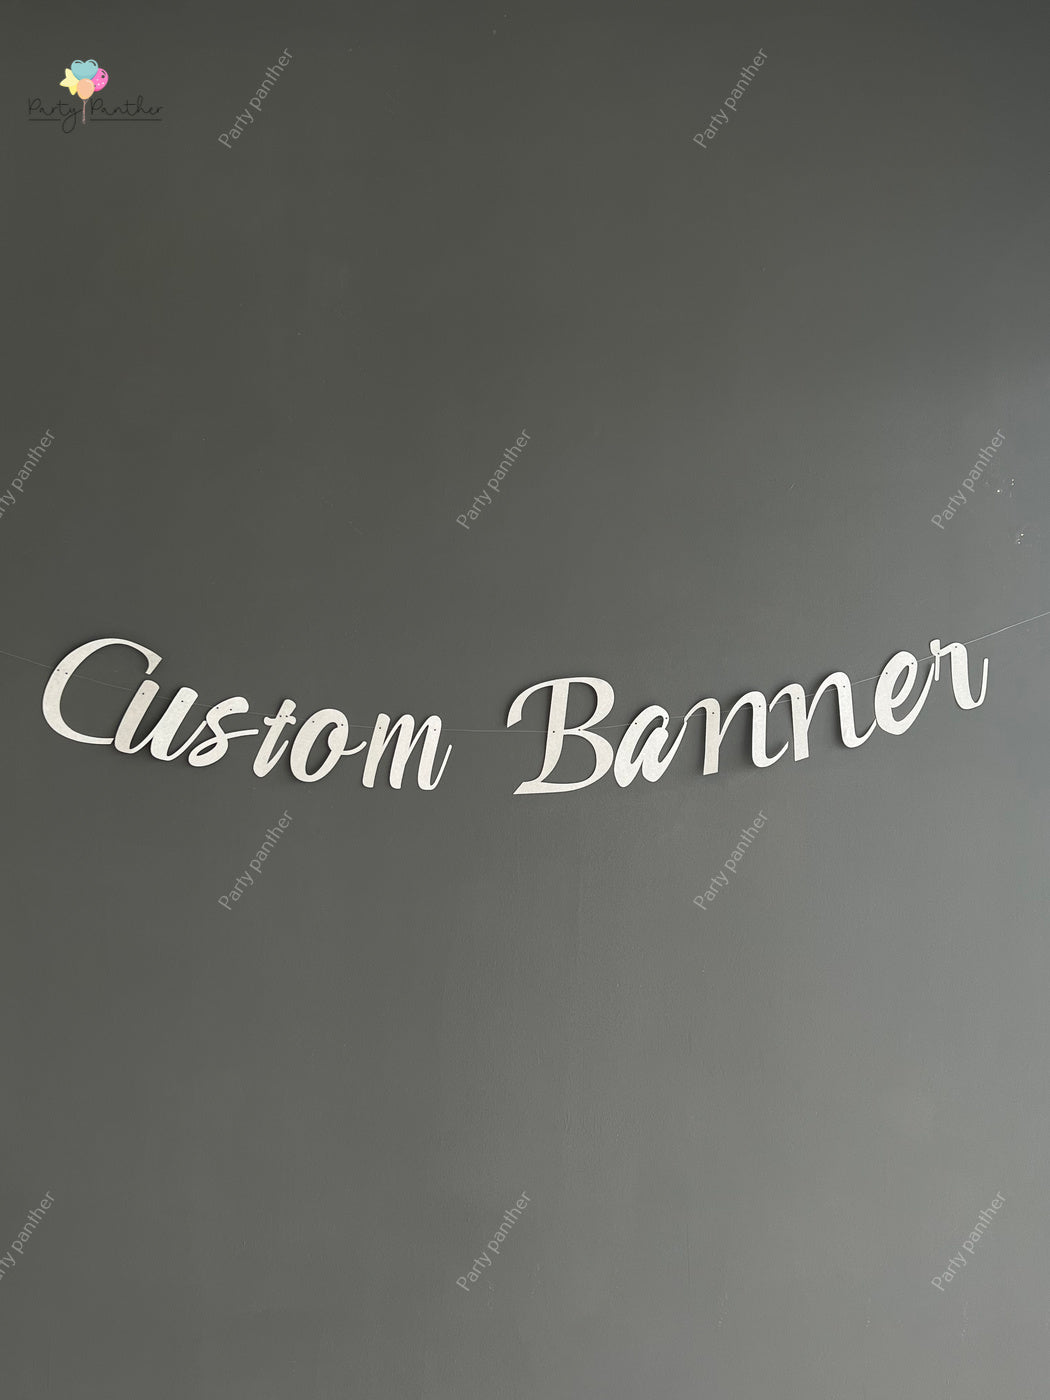 Customised Cursive Glitter Silver Banner - Personalized Handmade party decorations for all occasions